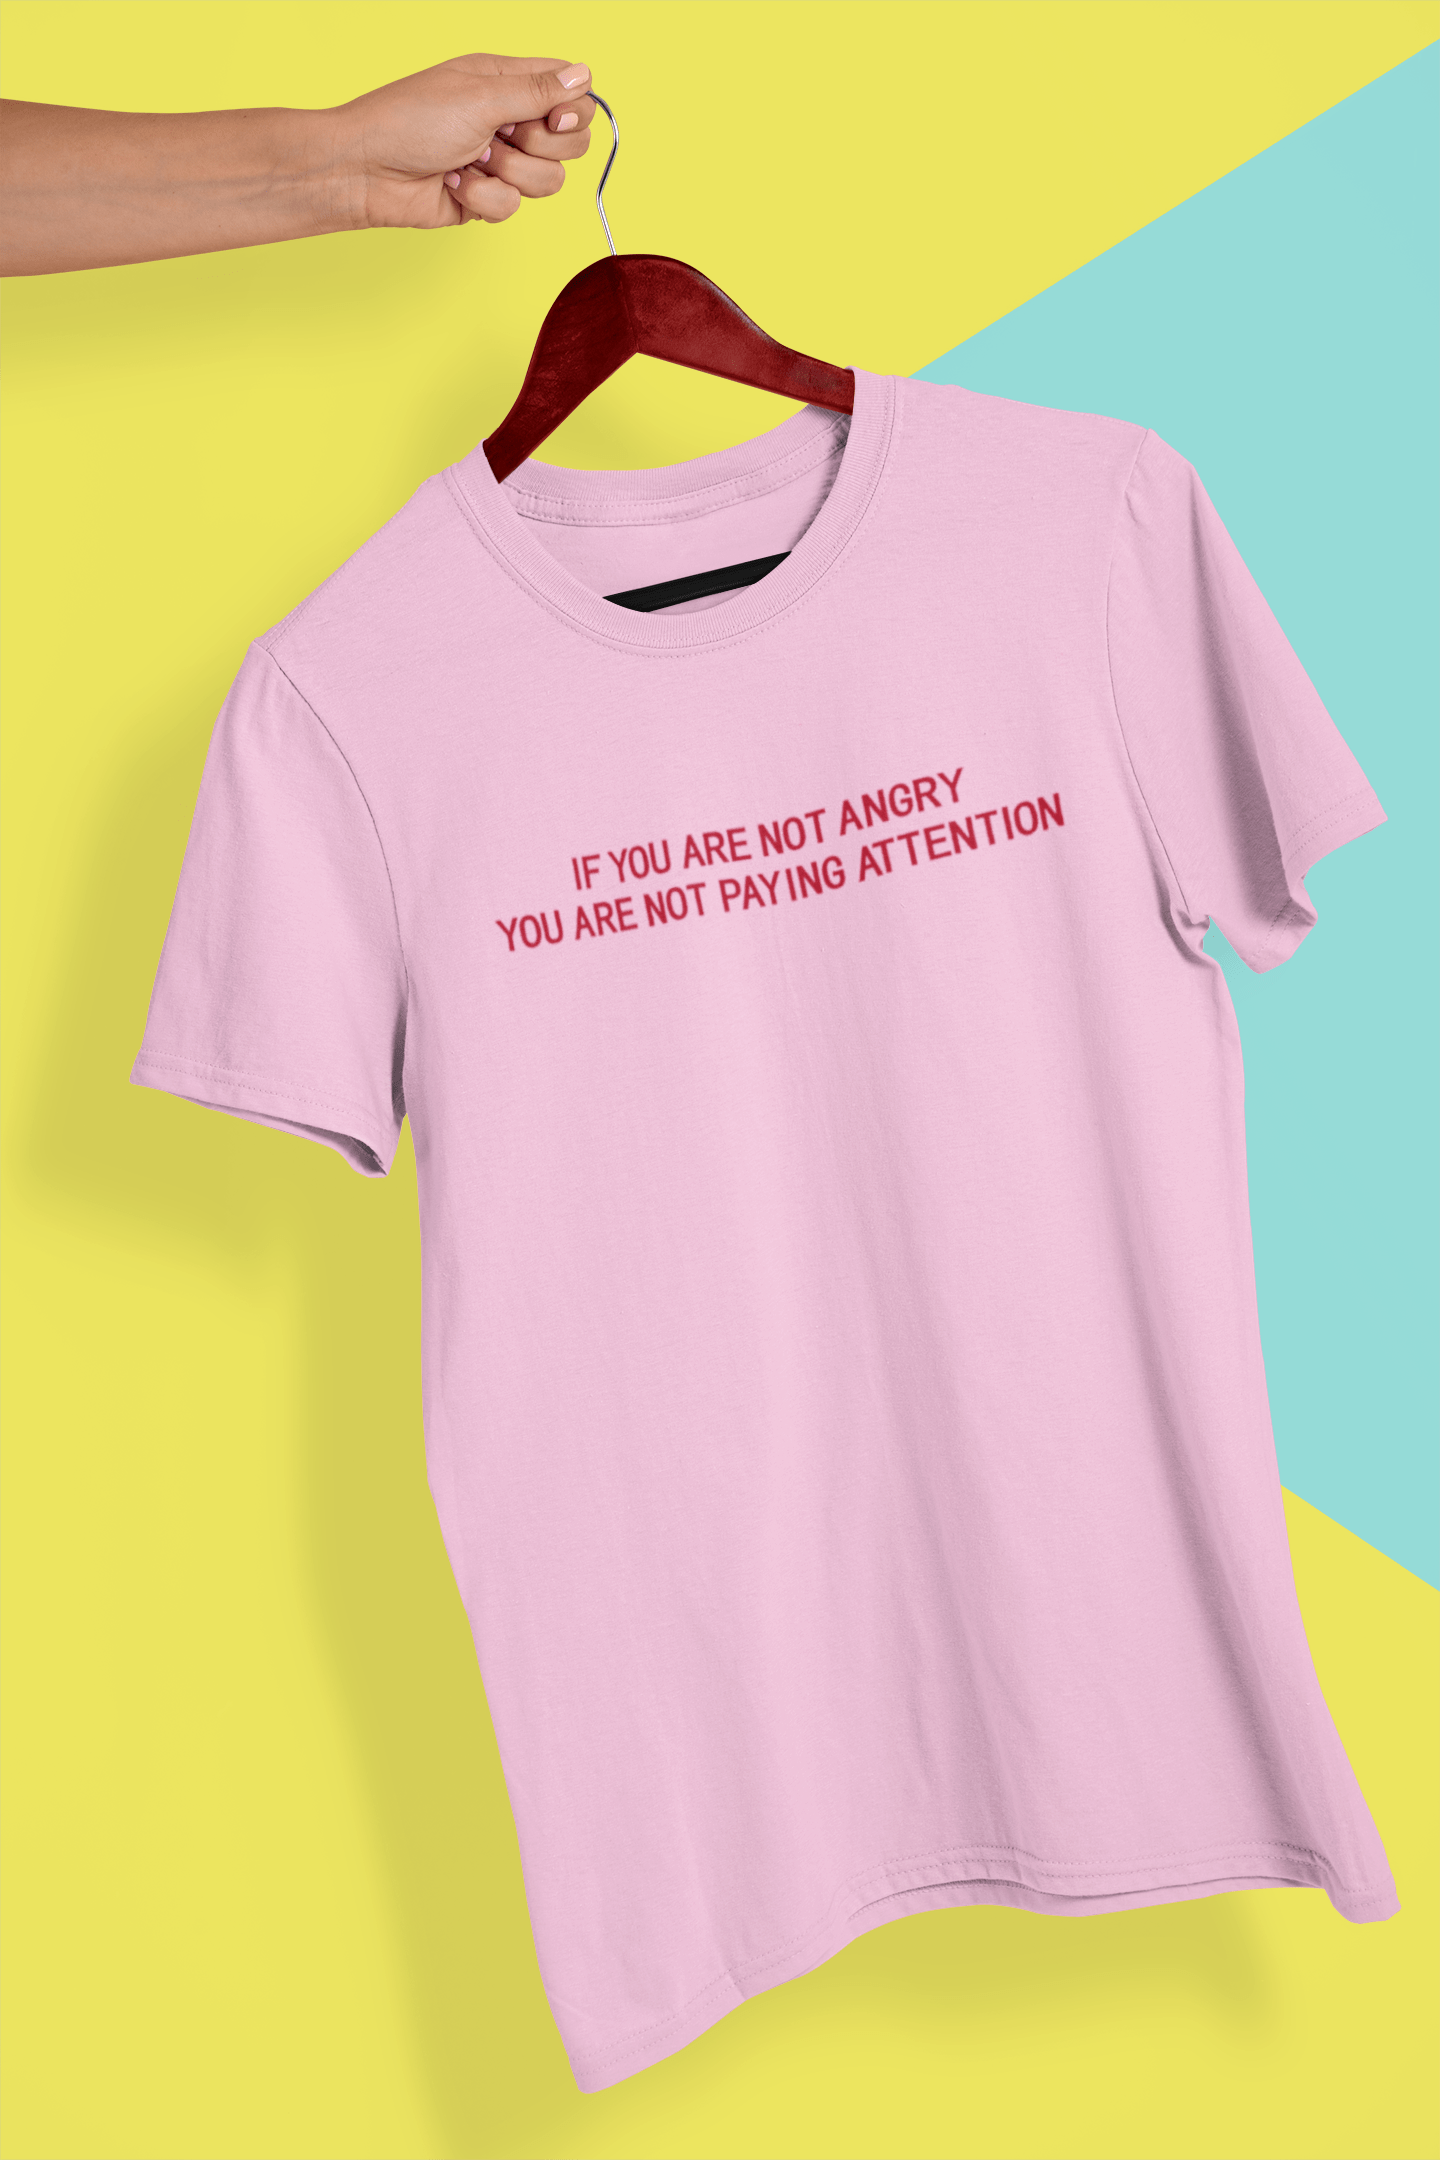 This is The Remix T-shirt IF YOU ARE NOT ANGRY, YOU ARE NOT PAYING ATTENTION - Unisex Crew Neck T-Shirt in Light Pink